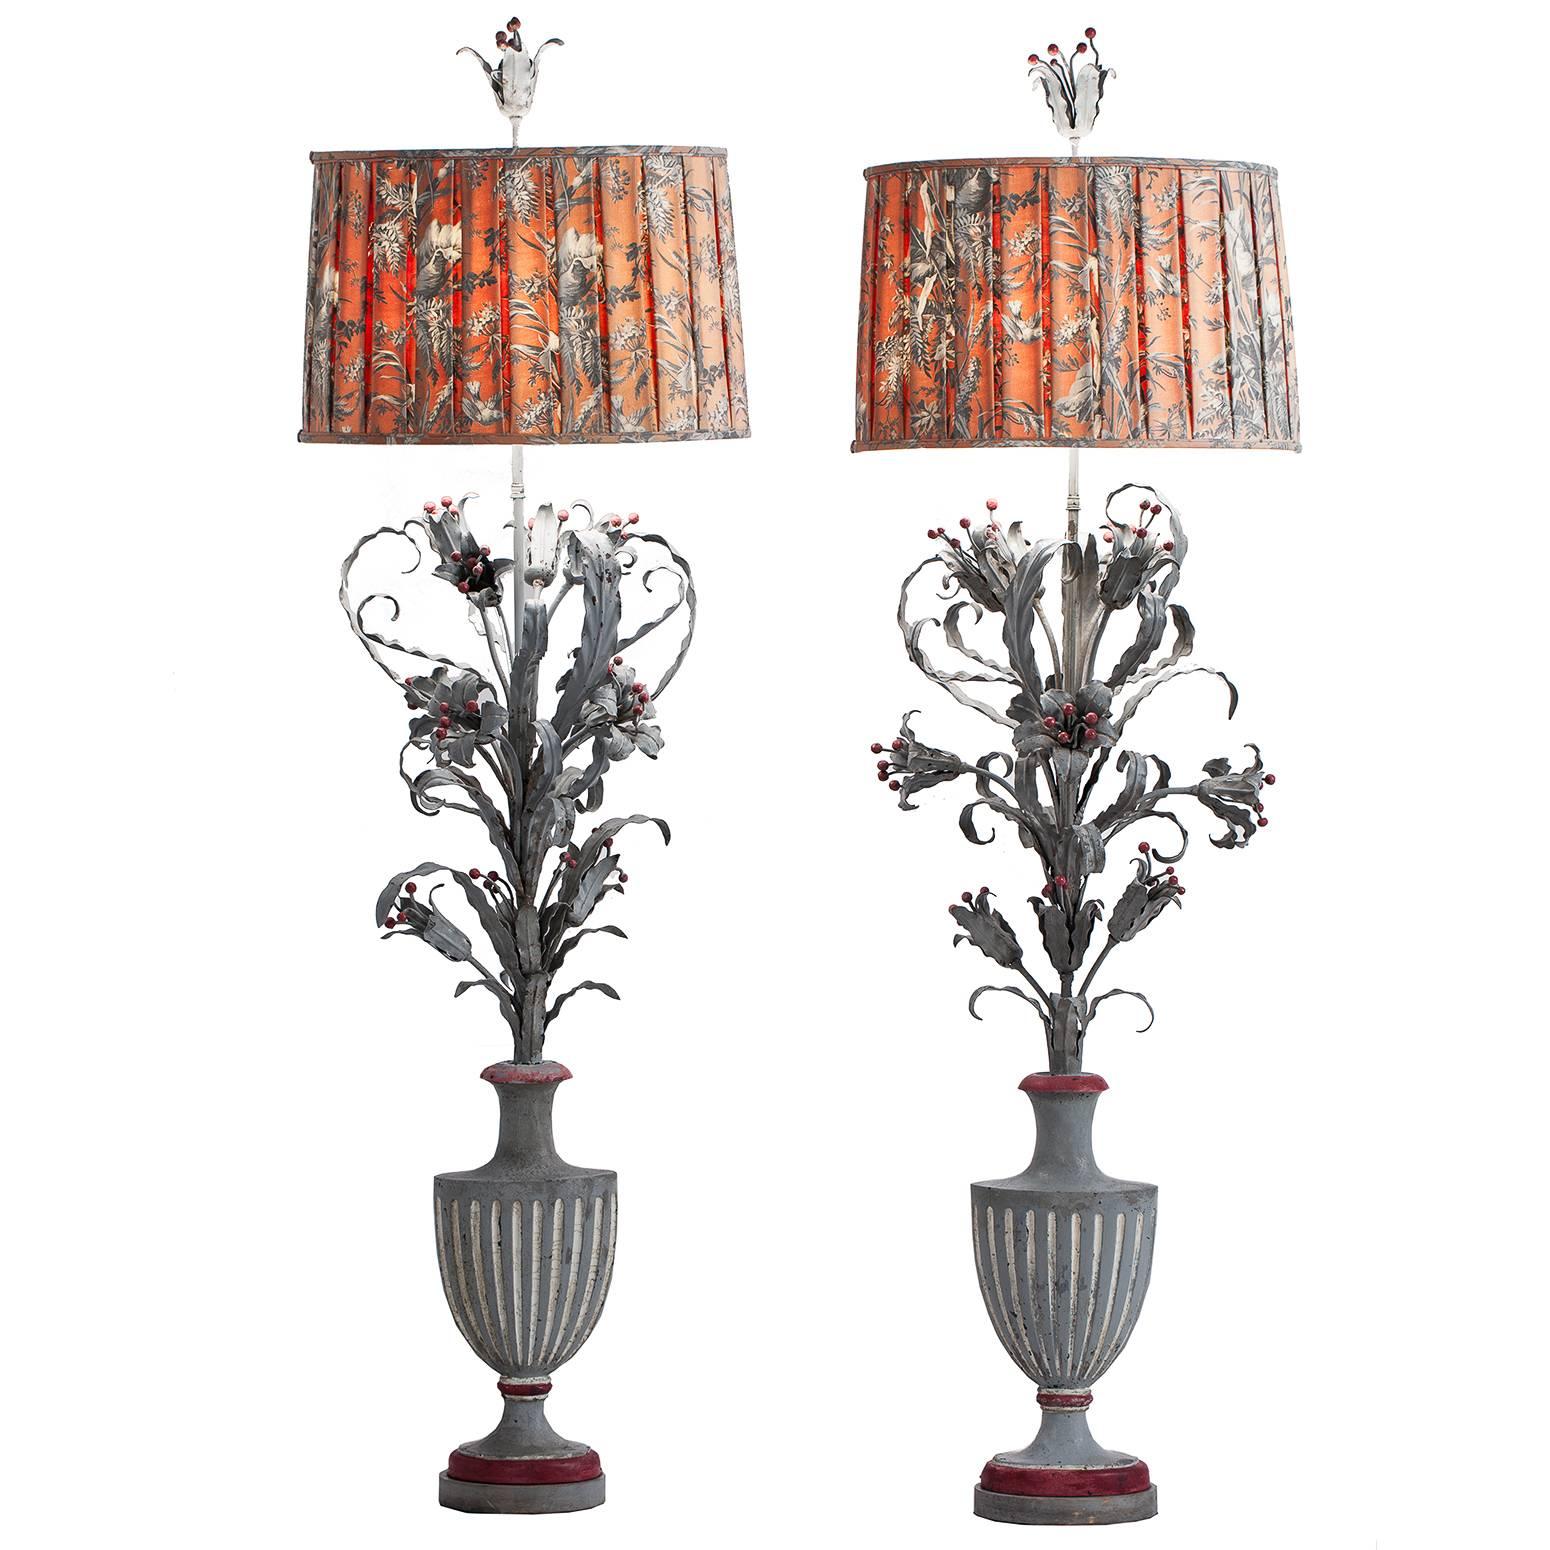 Pair of French Tole and Cast Iron Floor Lamps, circa 1900